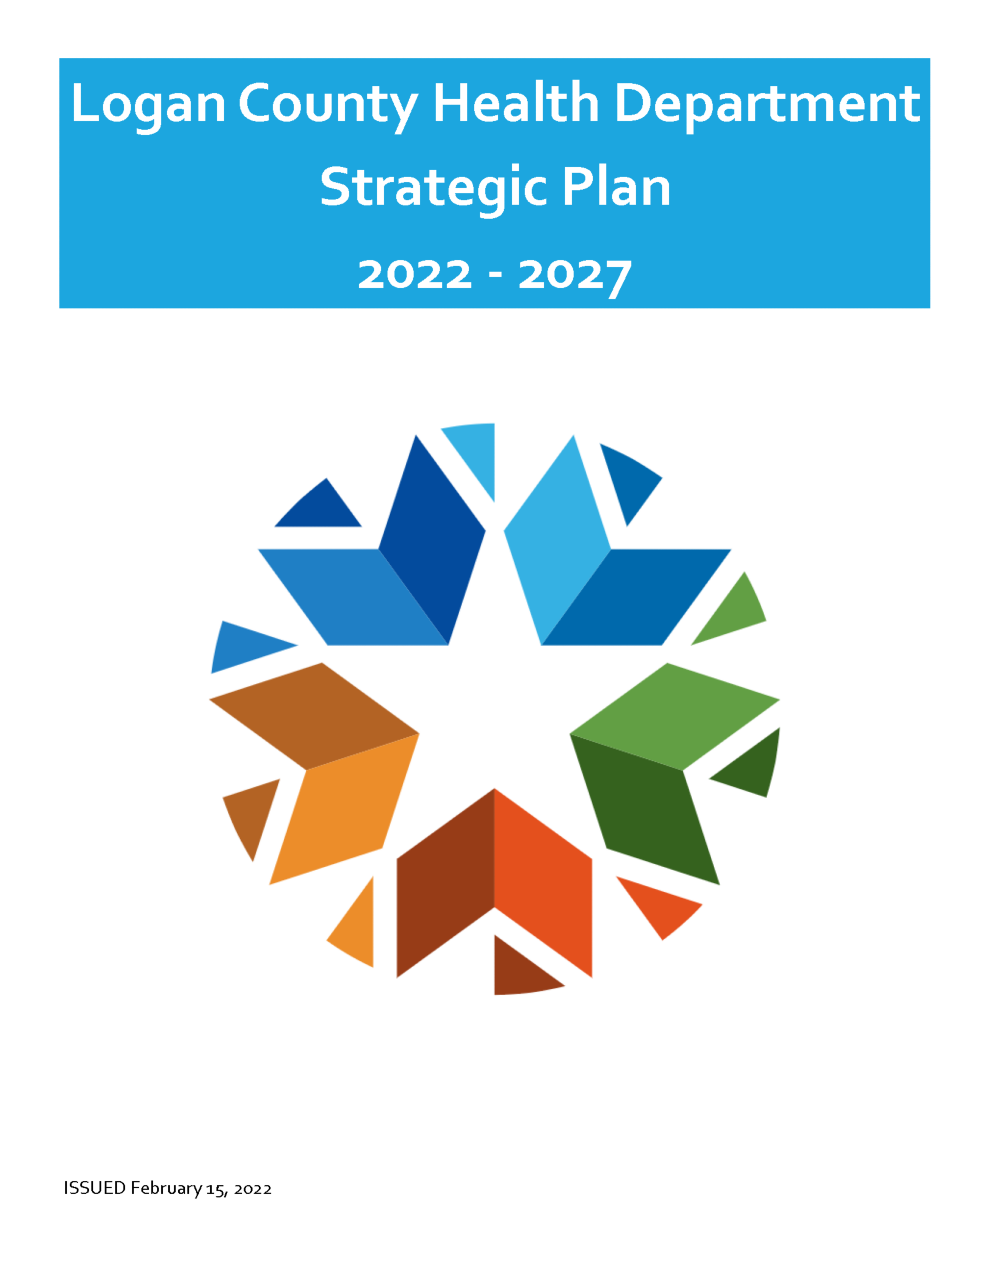 The cover of the Logan County Health Department Strategic Plan 2022-2027.